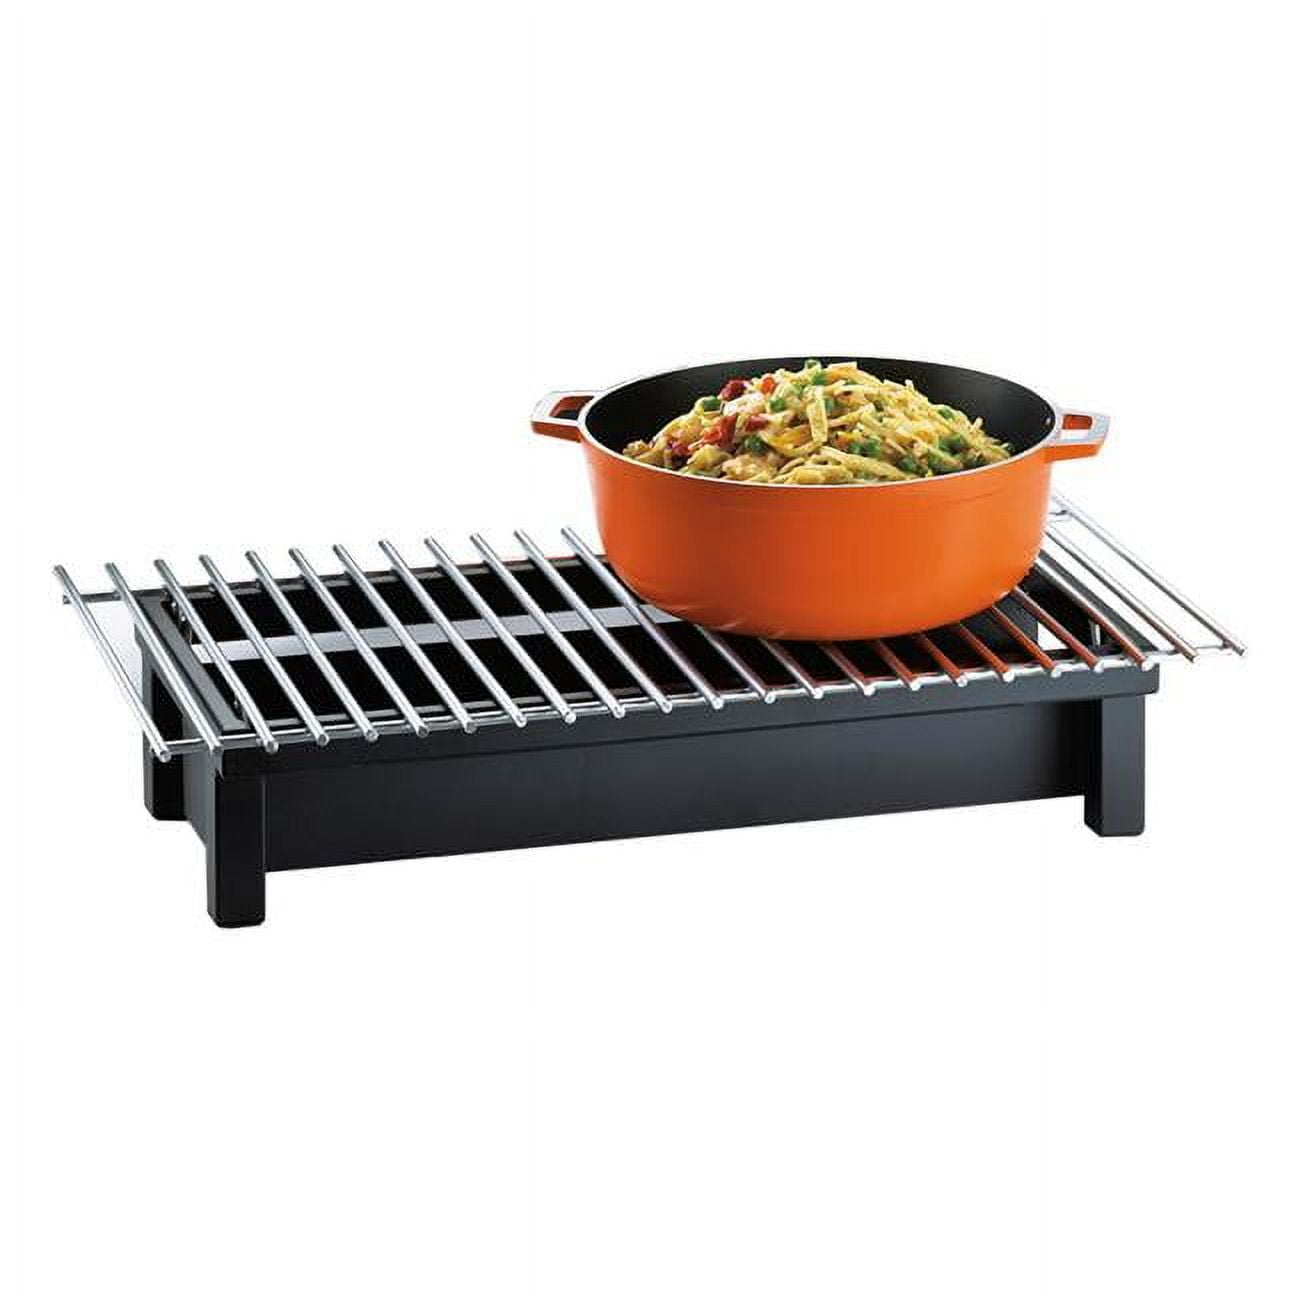 Picture of Cal Mil 1348-22-13 One by One Chafer Griddle, Black - 22 x 12 x 4 in.